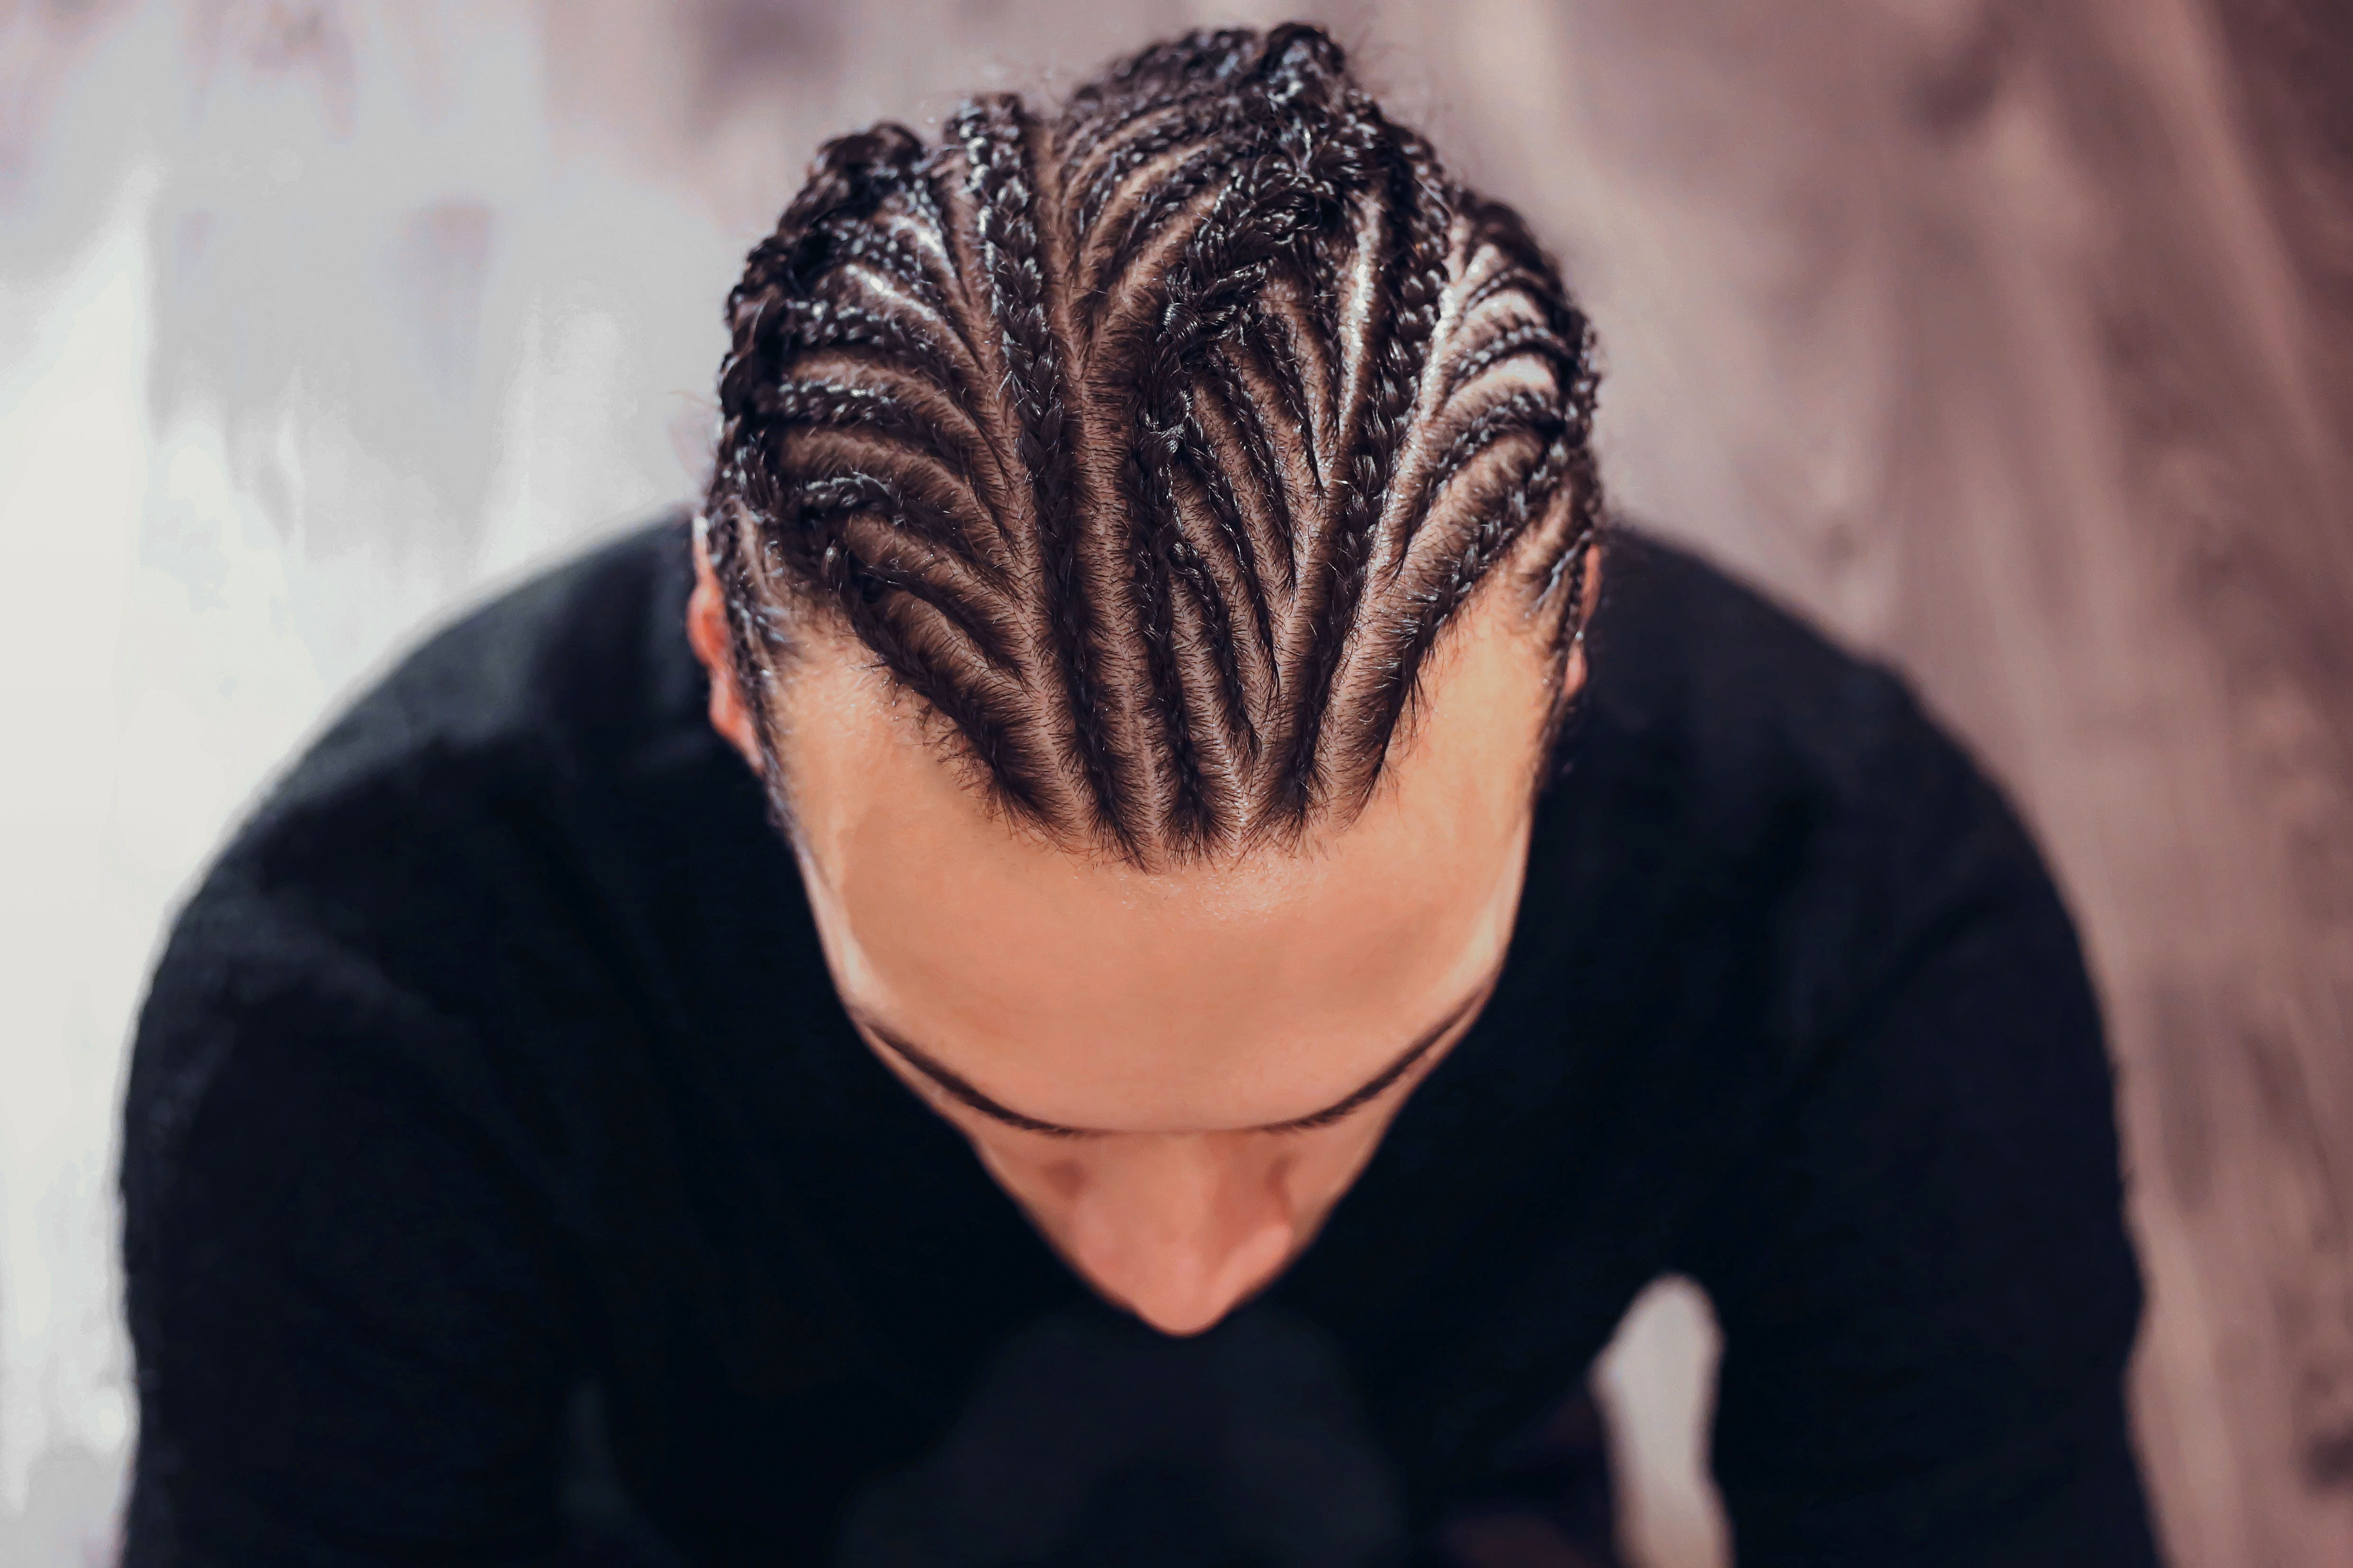 Young man with braids